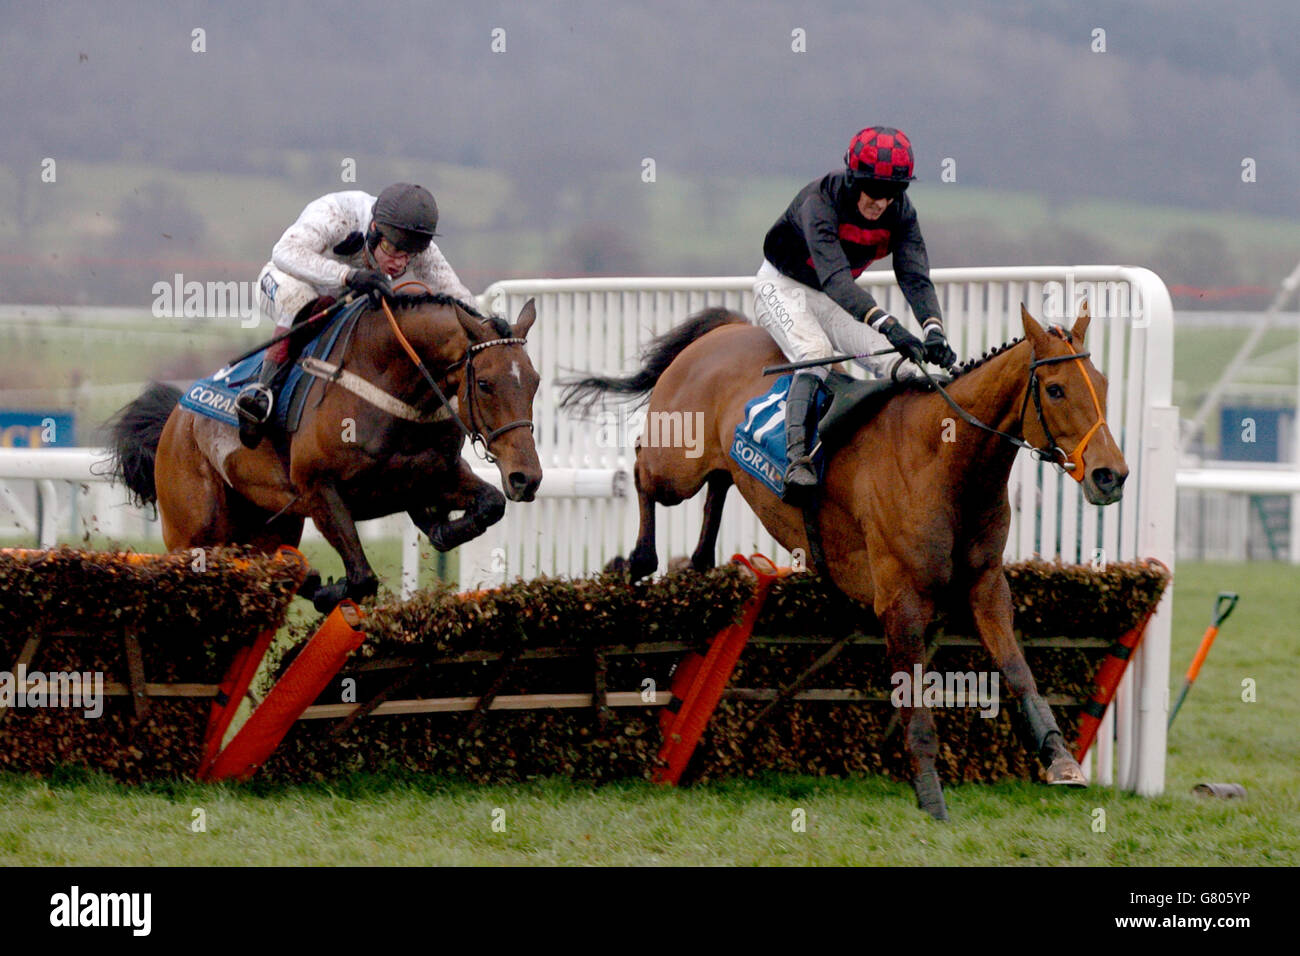 Horse Racing - Cheltenham Festival 2005 - Cheltenham Racecourse. Tumbling Dice ridden by Barry Geraghty (r) and Dancing Bay ridden by Mick Fitzgerald in The Coral Cup Stock Photo